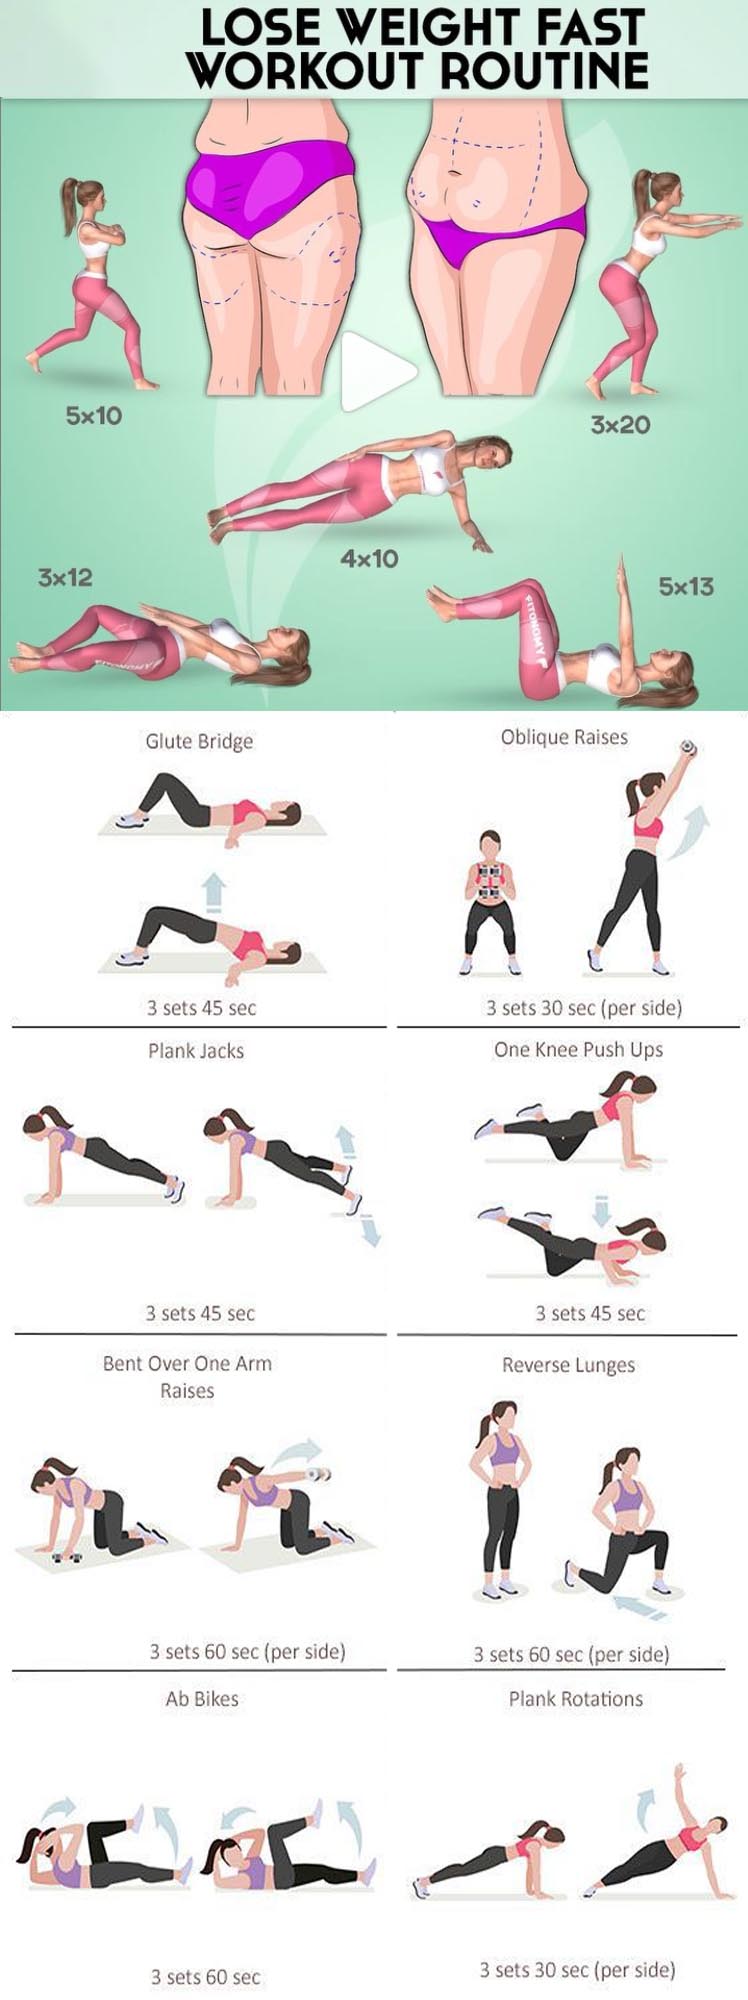 Lose Weight Fast Workout Routine